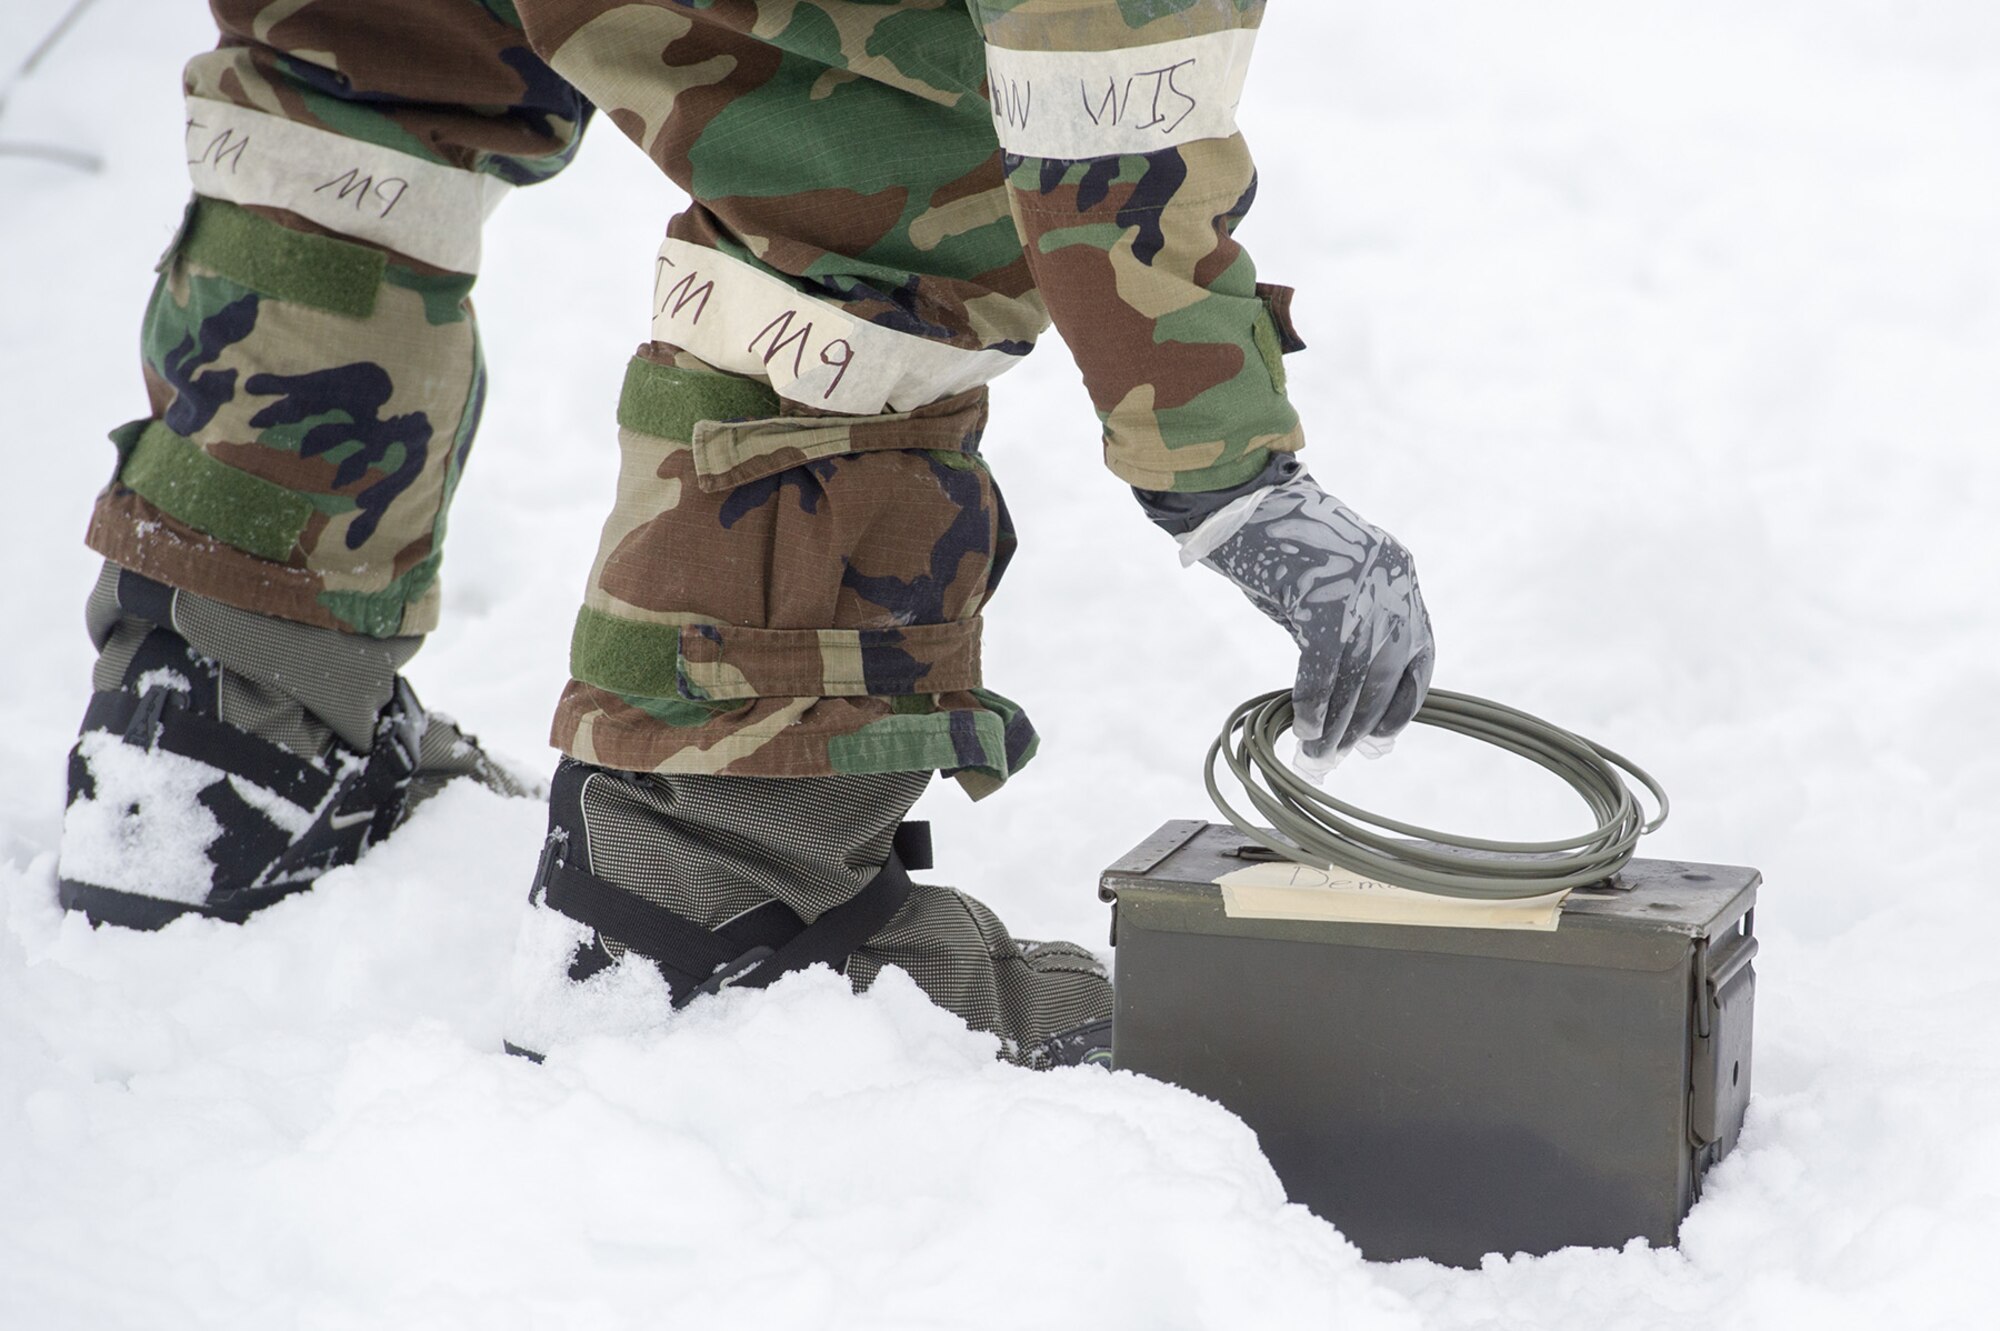 An Airman assigned to the 673d Civil Engineer Squadron, Explosives Ordinance Disposal Flight, picks up detonation cord while conducting a live-fire demolitions exercise in Mission Oriented Protective Posture 4 on Joint Base Elmendorf-Richardson, Alaska, Feb.14, 2018.  The Airmen were conducting EOD training in a simulated chemical weapons contaminated environment.